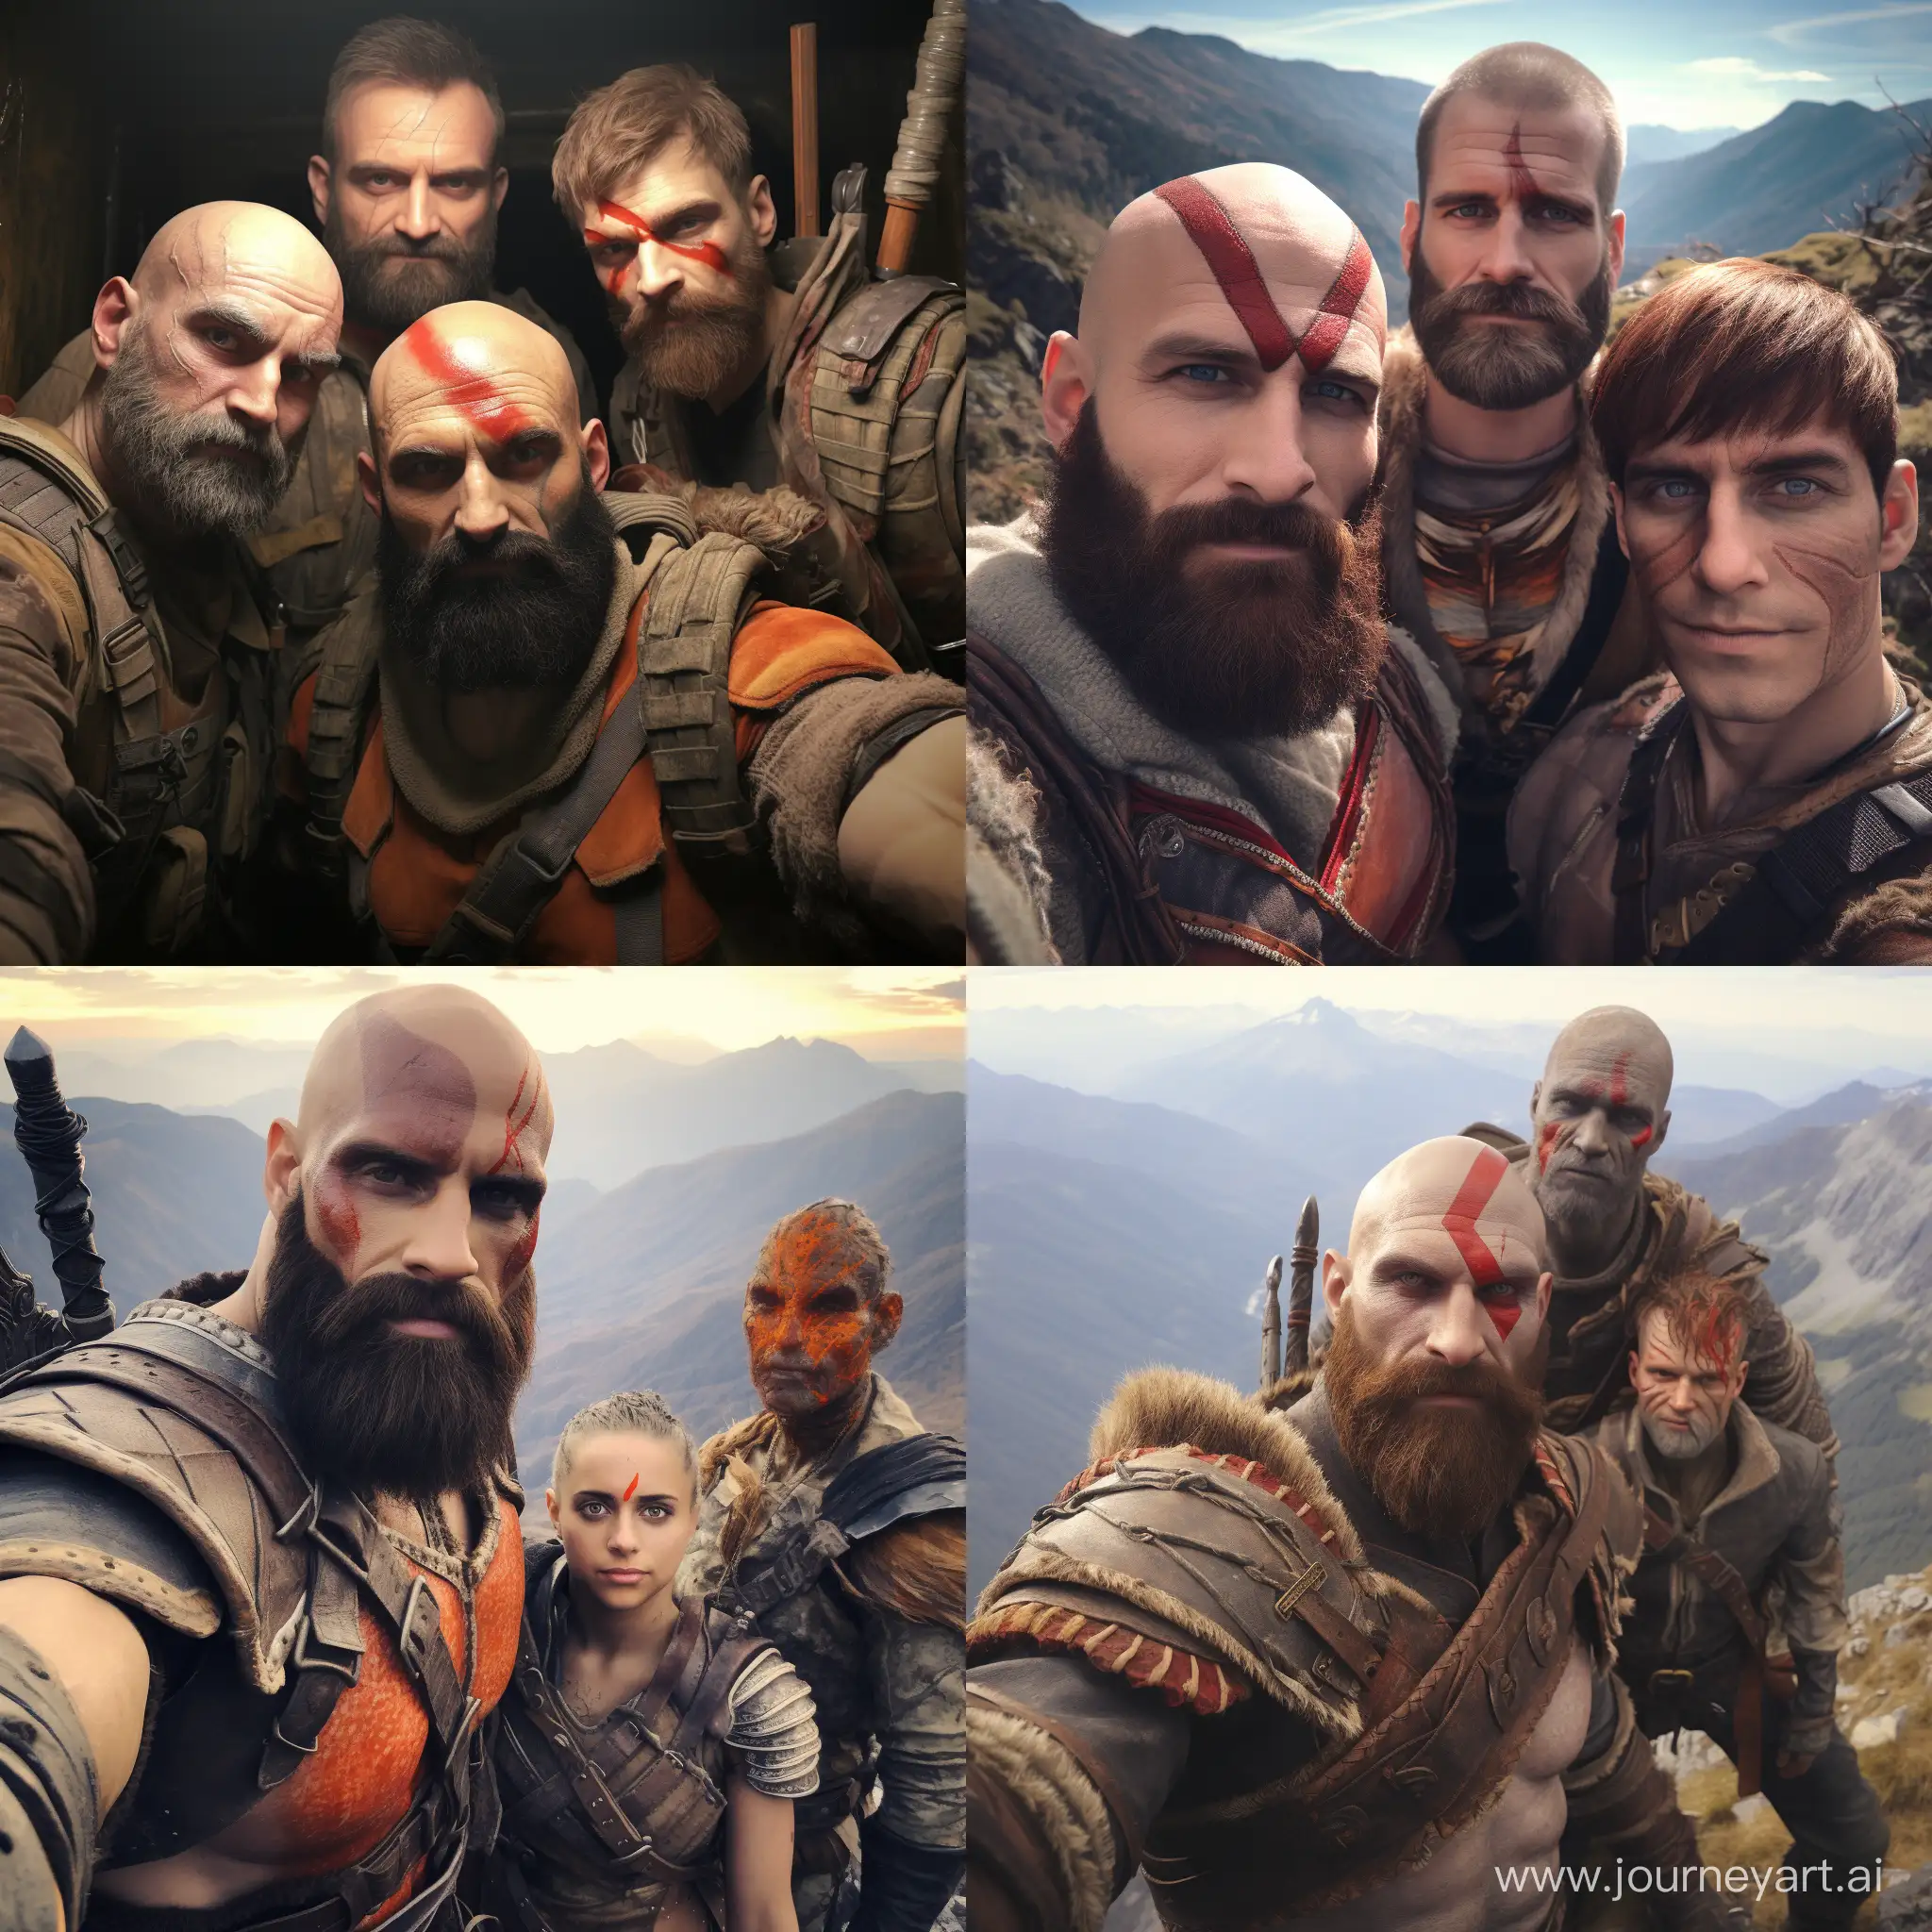 A selfie with joel and kratos